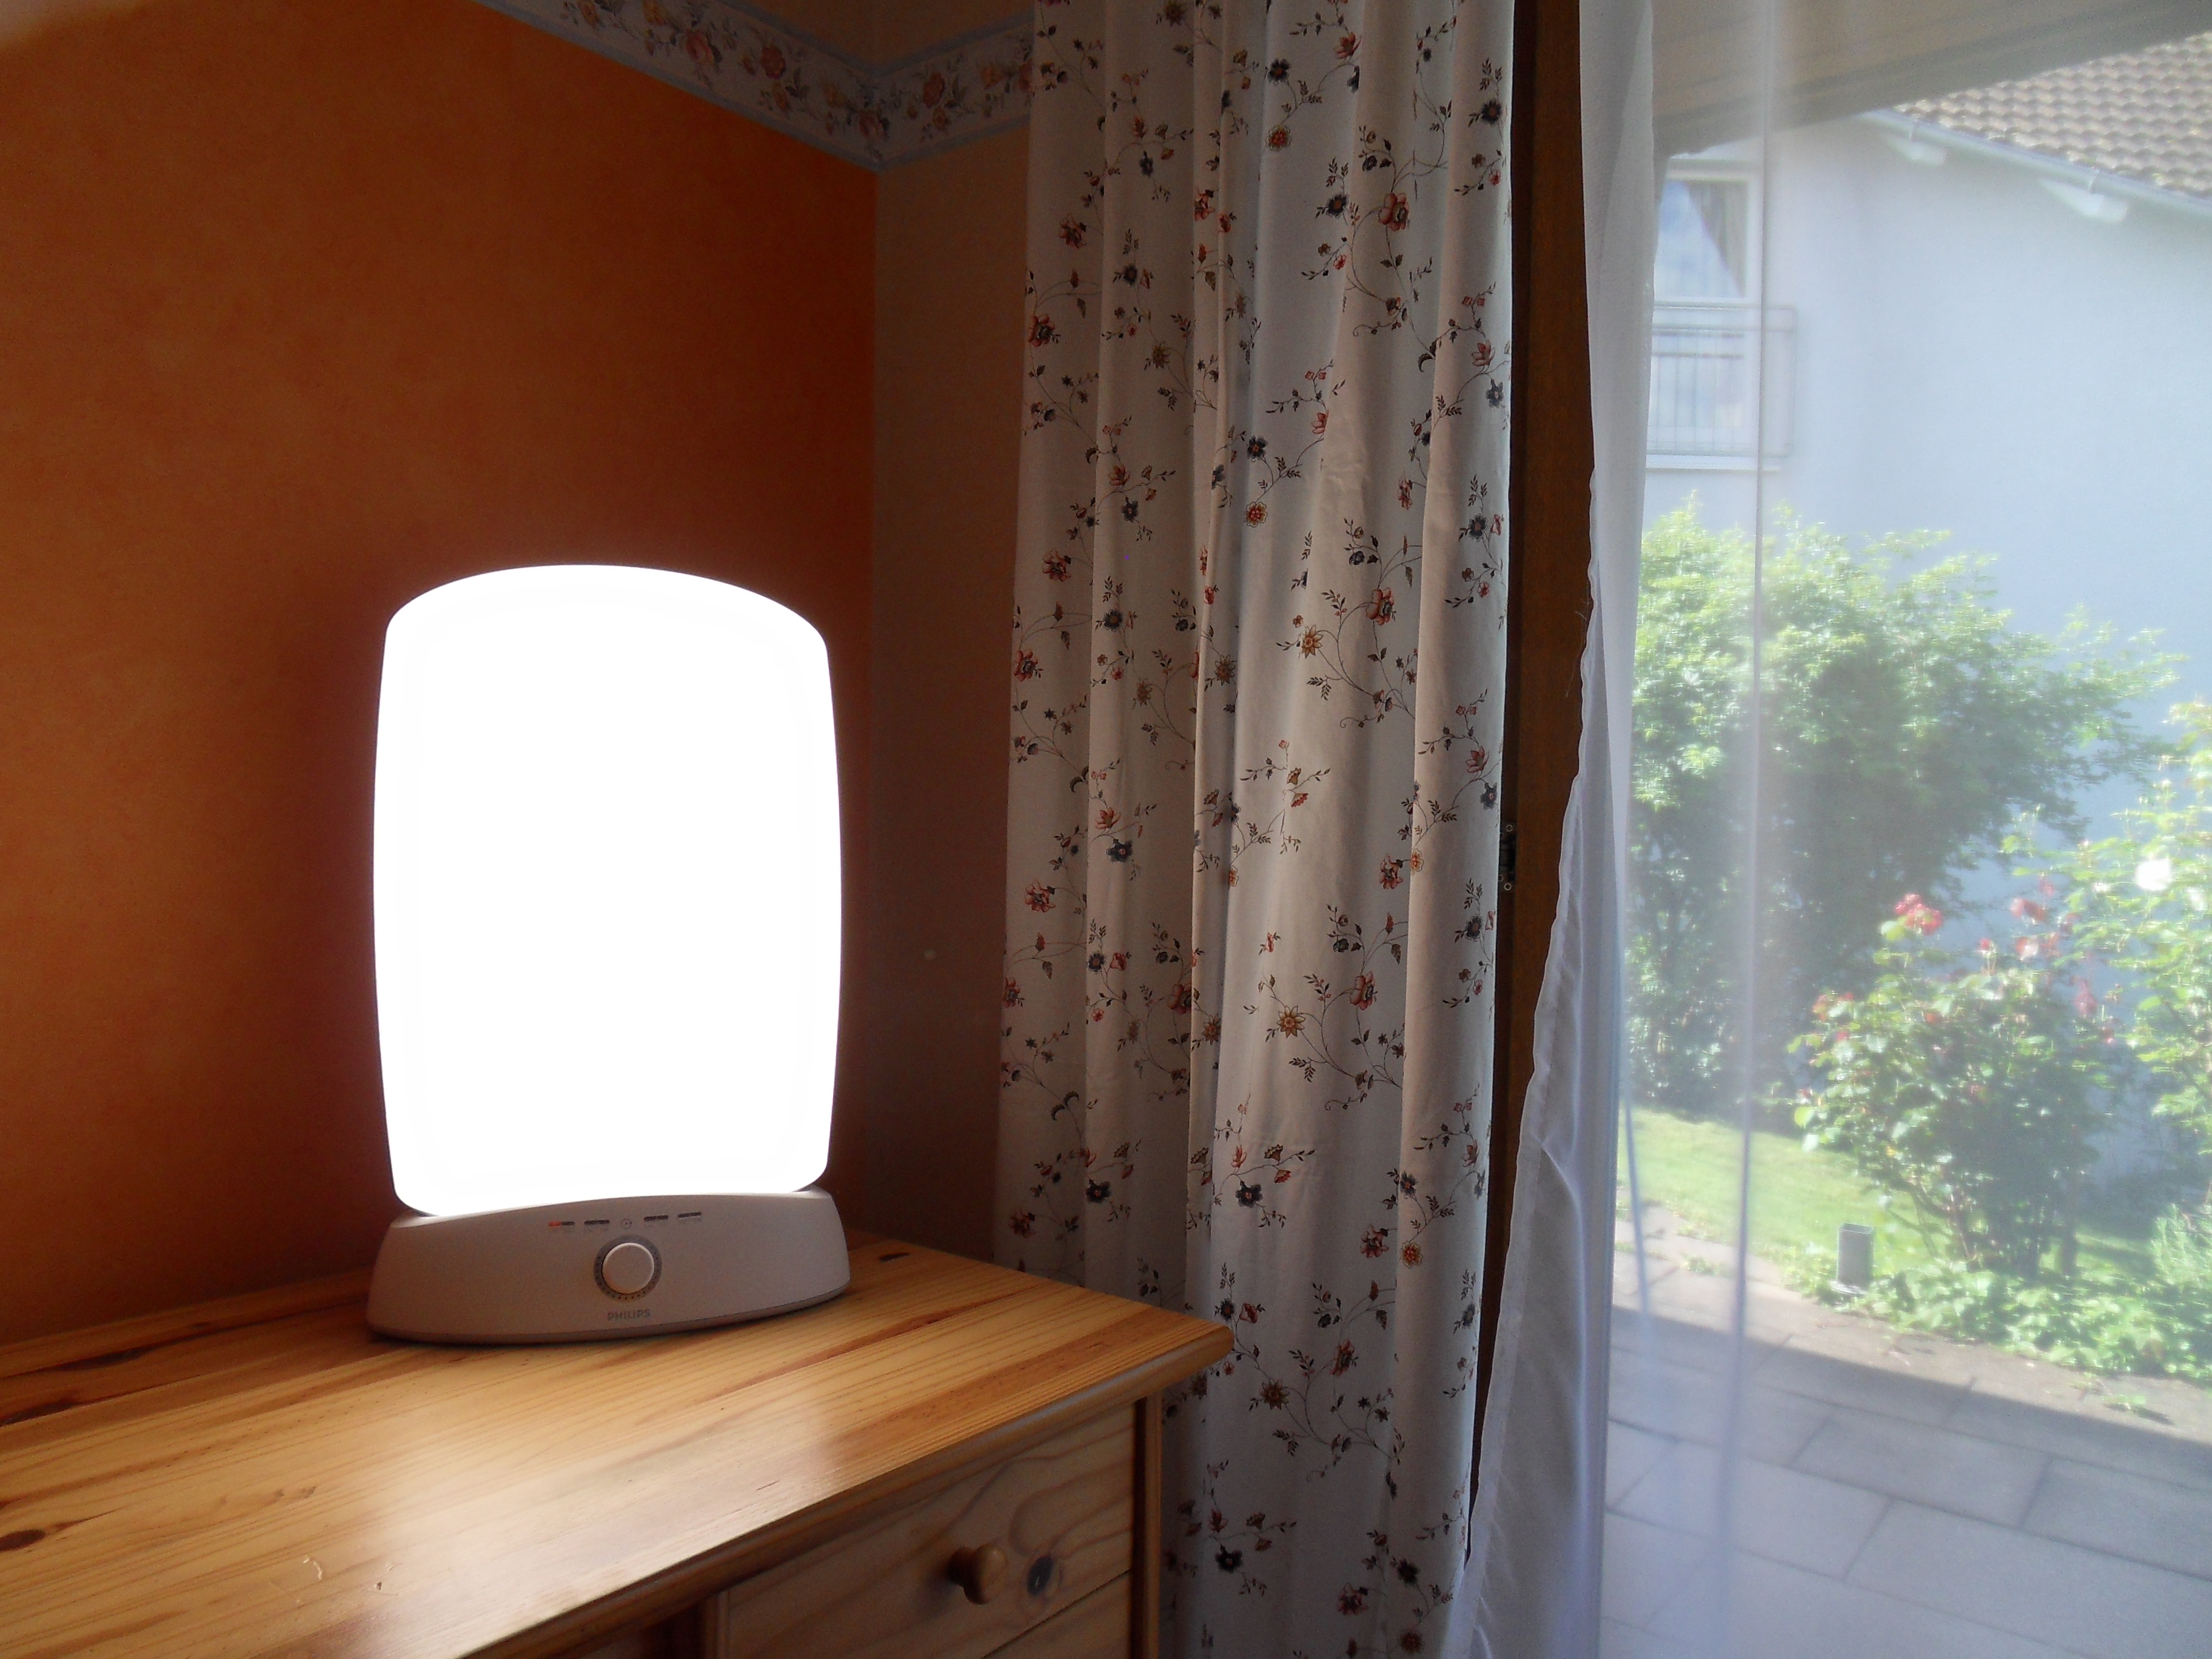 Dateilight Therapy Lamp And Sunlight Wikipedia throughout proportions 3648 X 2736